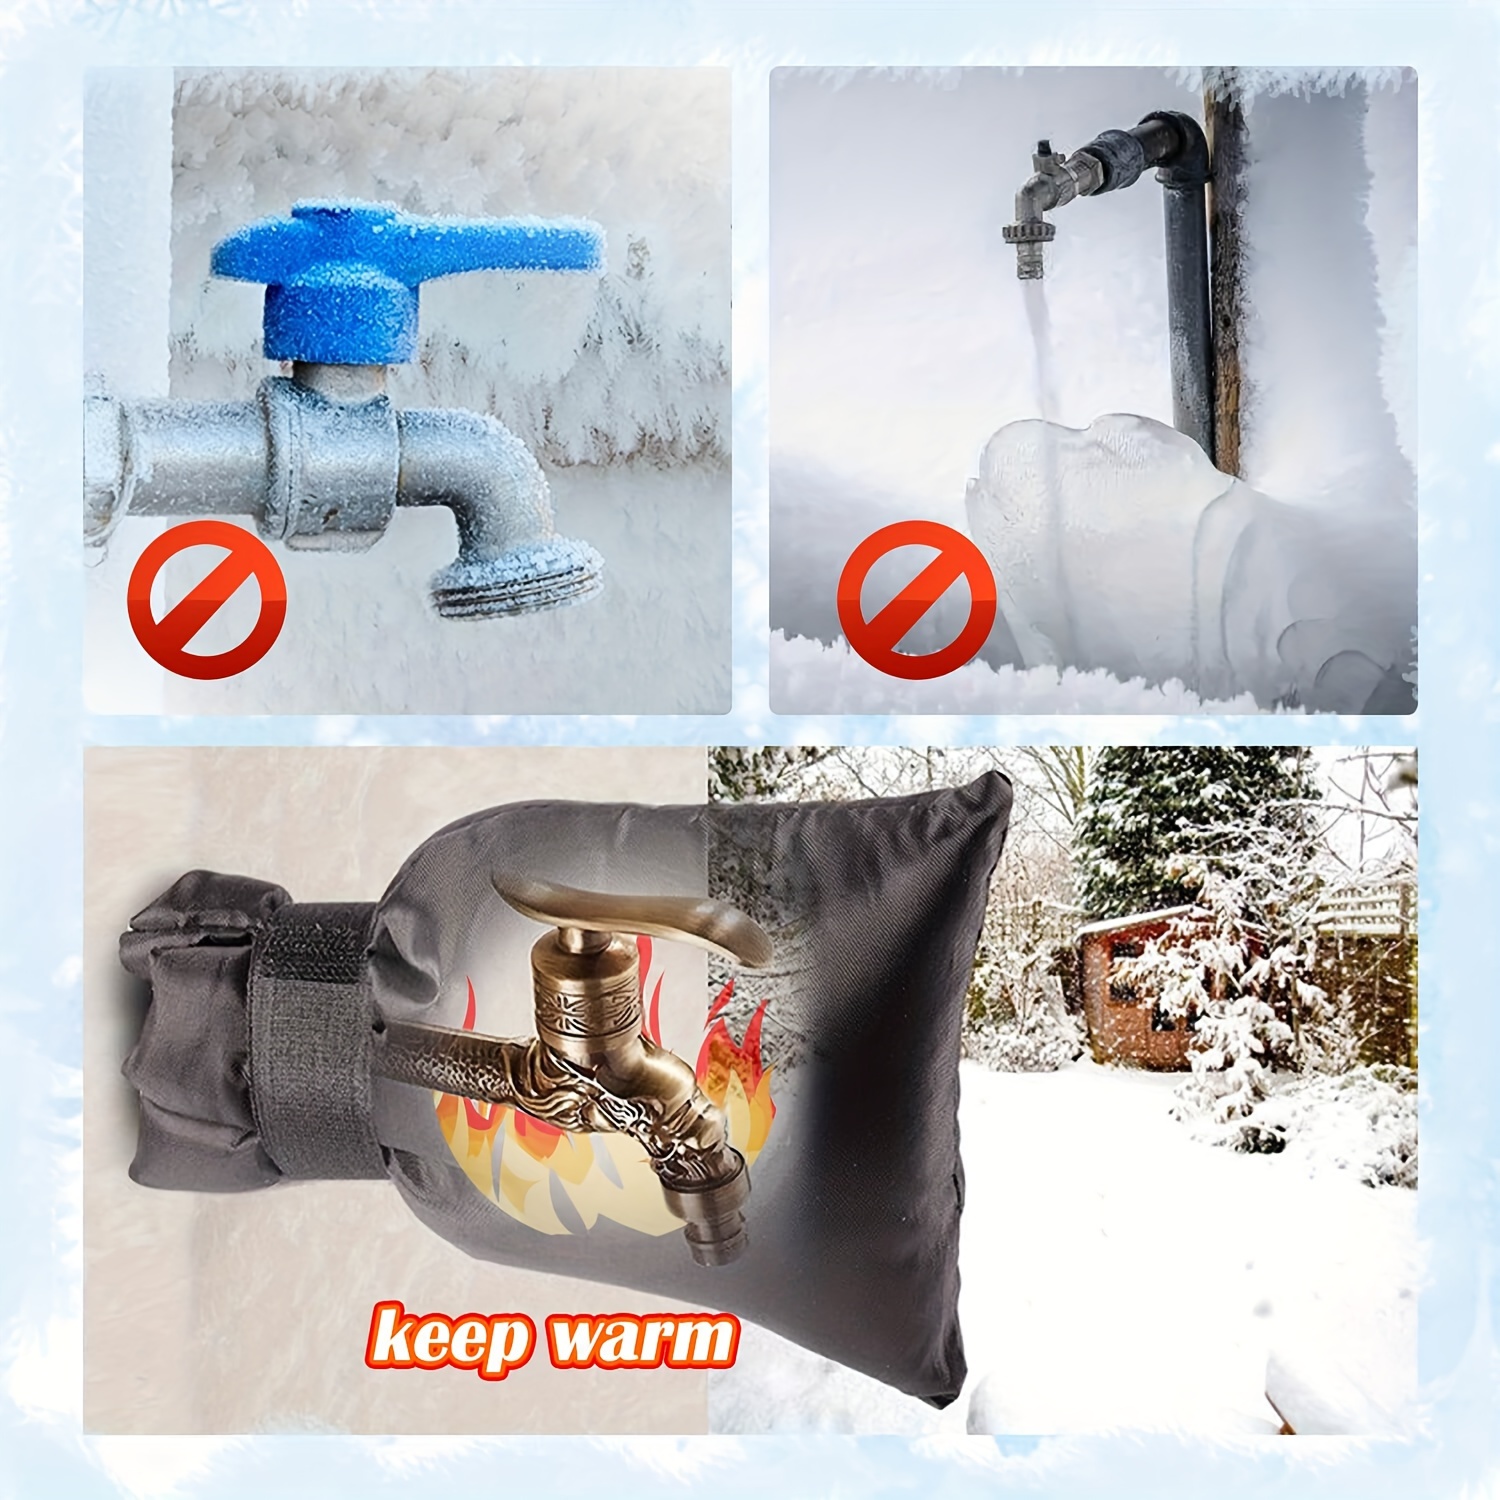 Outdoor Faucet Cover,Outdoor Winter Faucet Protector, Spigot Cover Water  Faucet Socks for Freeze Protection,Waterproof Faucet Insulation,Yard Faucet